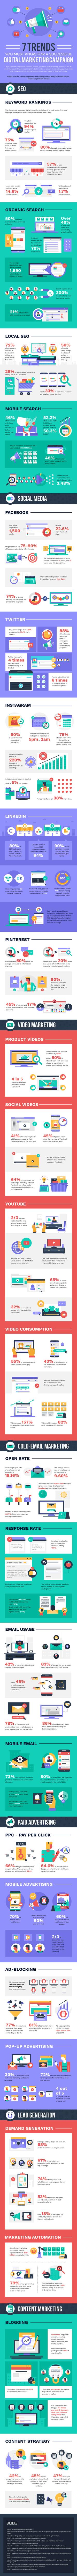 (Infographic) 7 Trends You Must Know For A Successful Digital Marketing Campaign 2